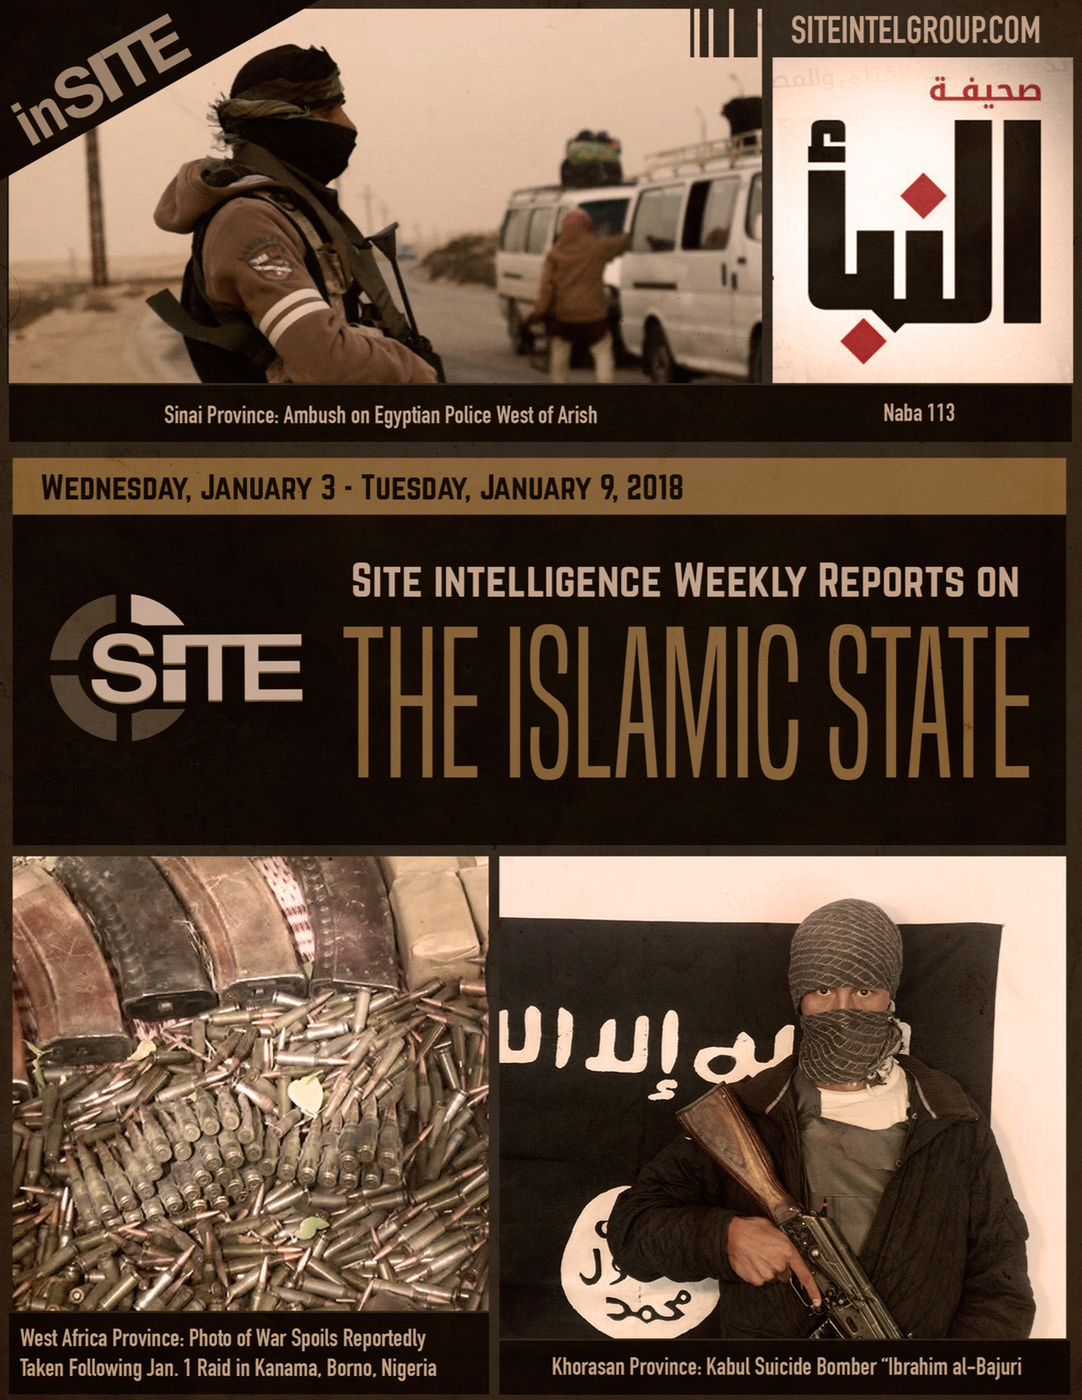 Weekly inSITE on the Islamic State, January 3-9, 2018